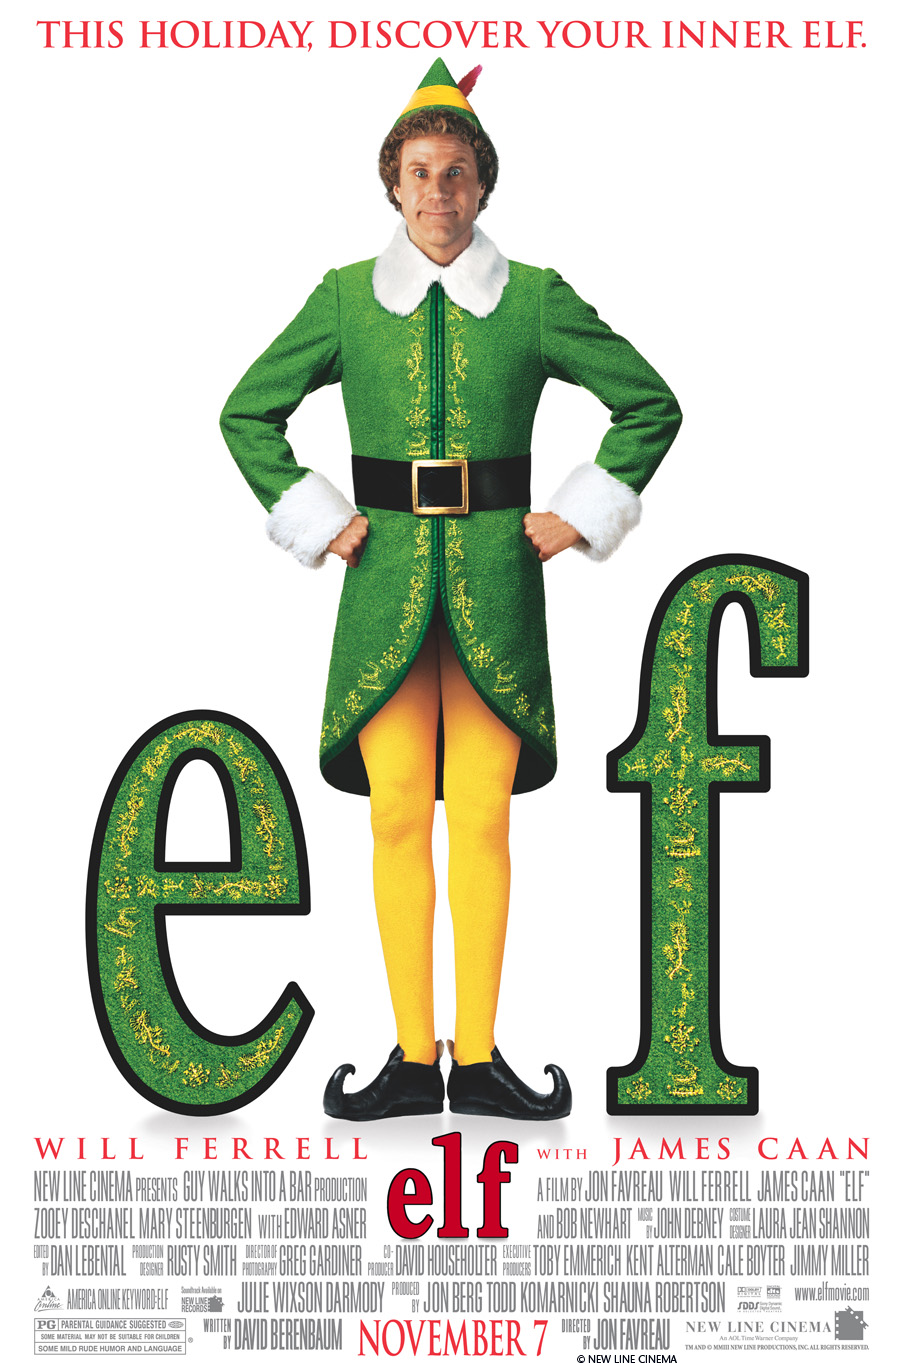 man dressed as an elf acting as the L in between the letters e and f to spell the word elf